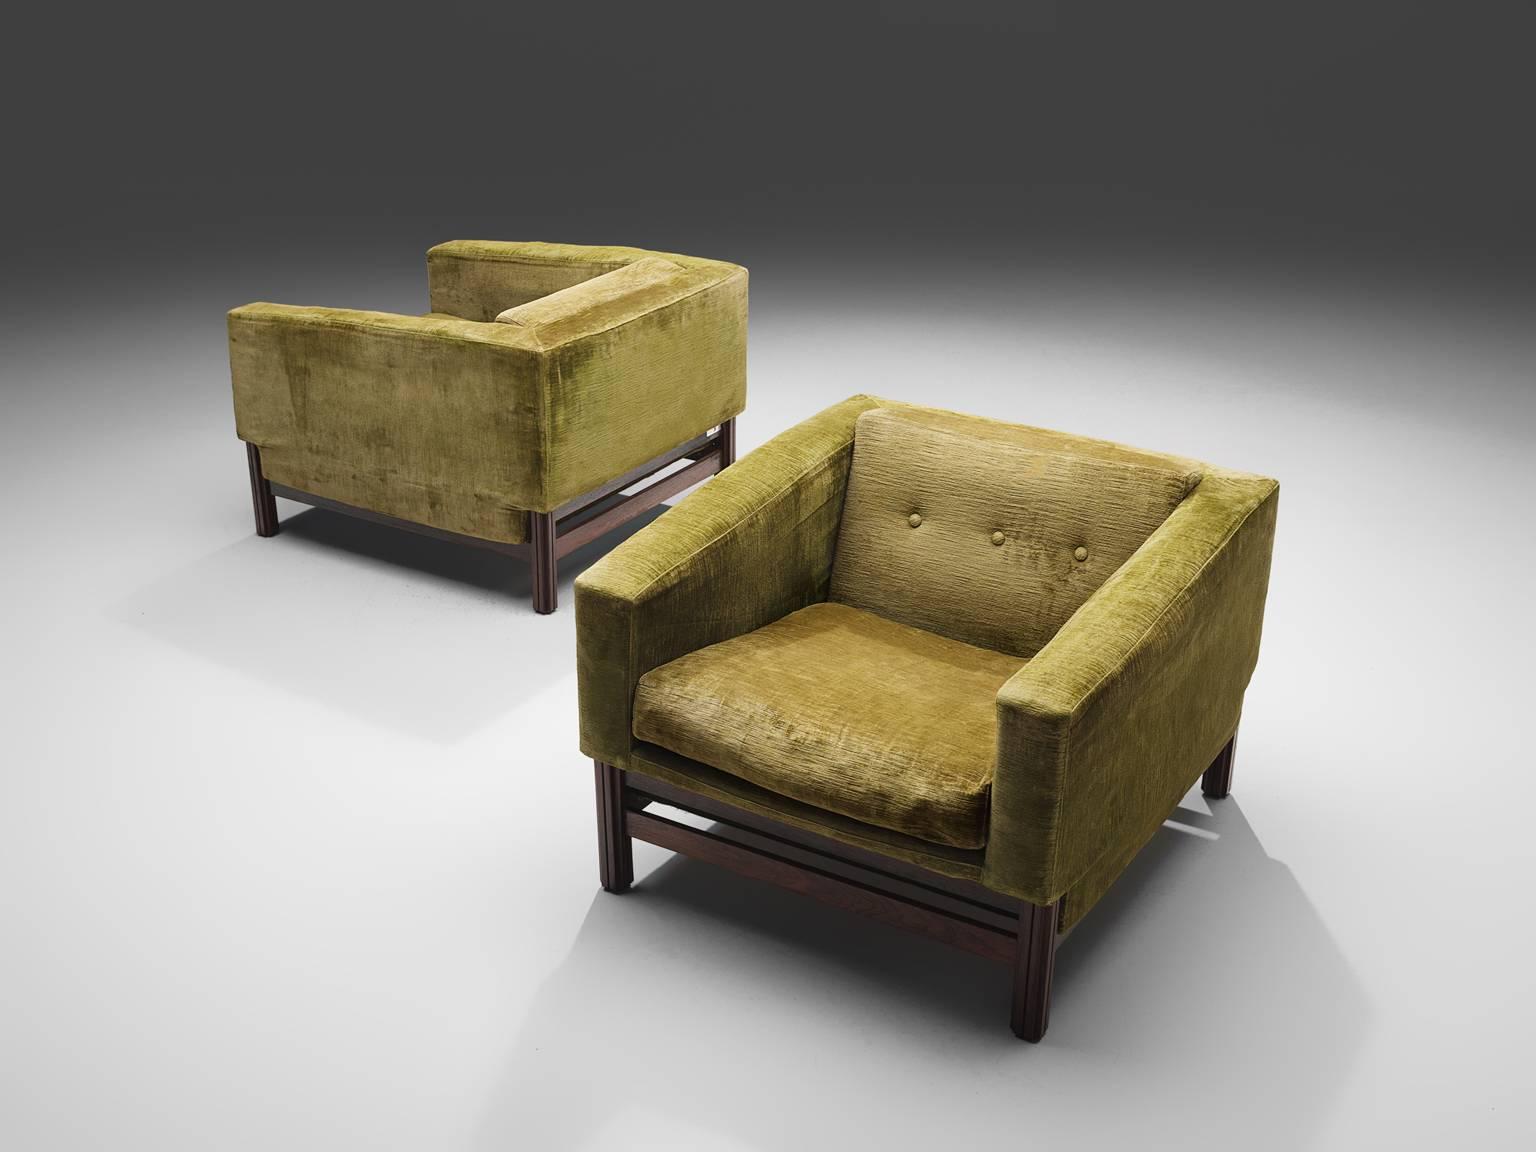 Saporiti, set of two lounge chairs in rosewood and green velvet fabric, Italy, 1960s.

These chairs, equipped with a rosewood frame still hold their original green upholstery. These chairs are designed in a modest, yet distinguished look. The